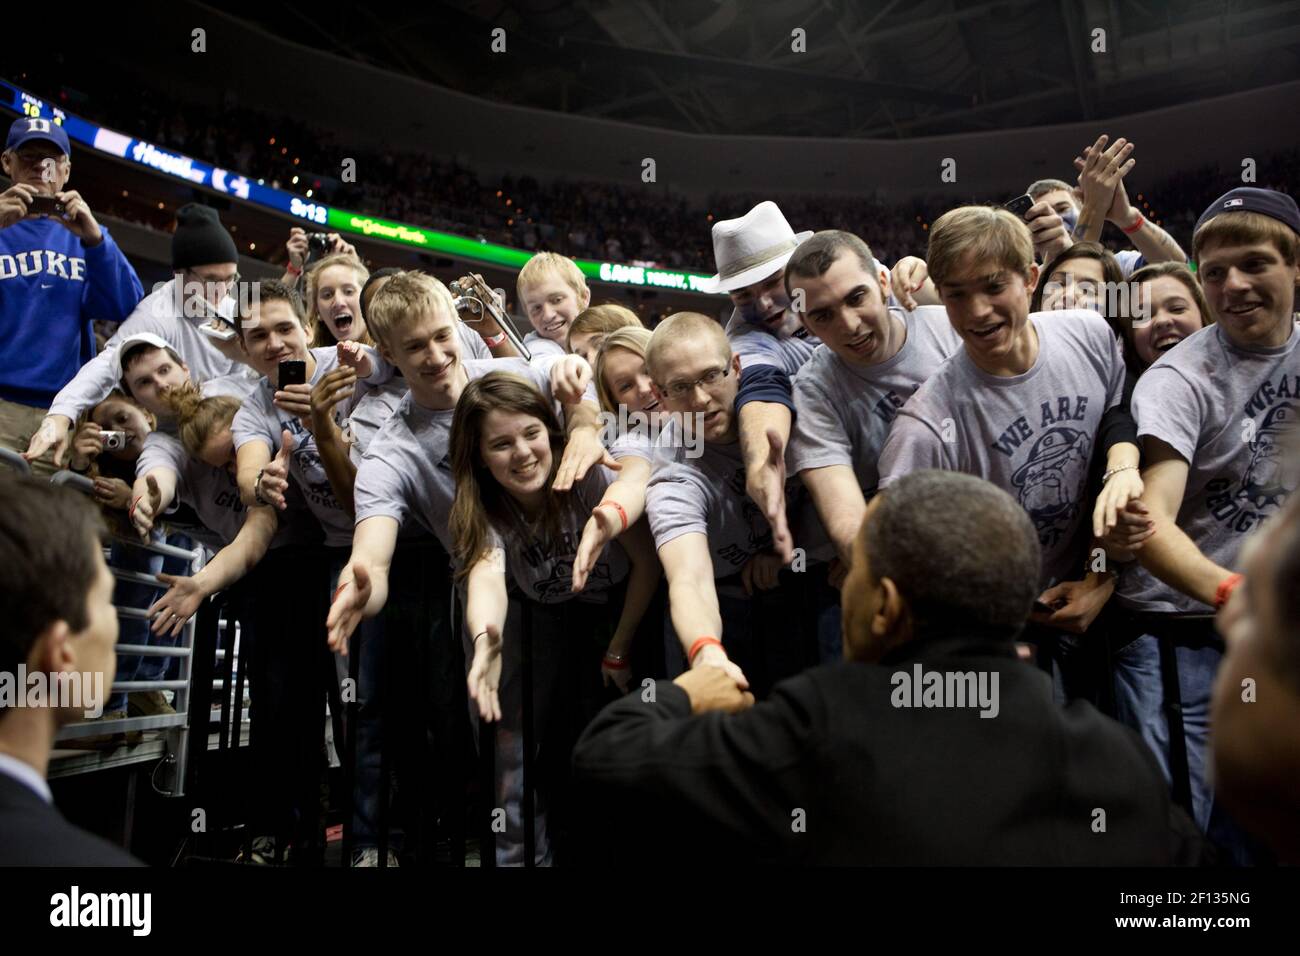 President Barack Obama shakes hands with fans at the Georgetown-Duke college basketball game at the Verizon Center in Washington D.C. Jan. 30 2010. Stock Photo